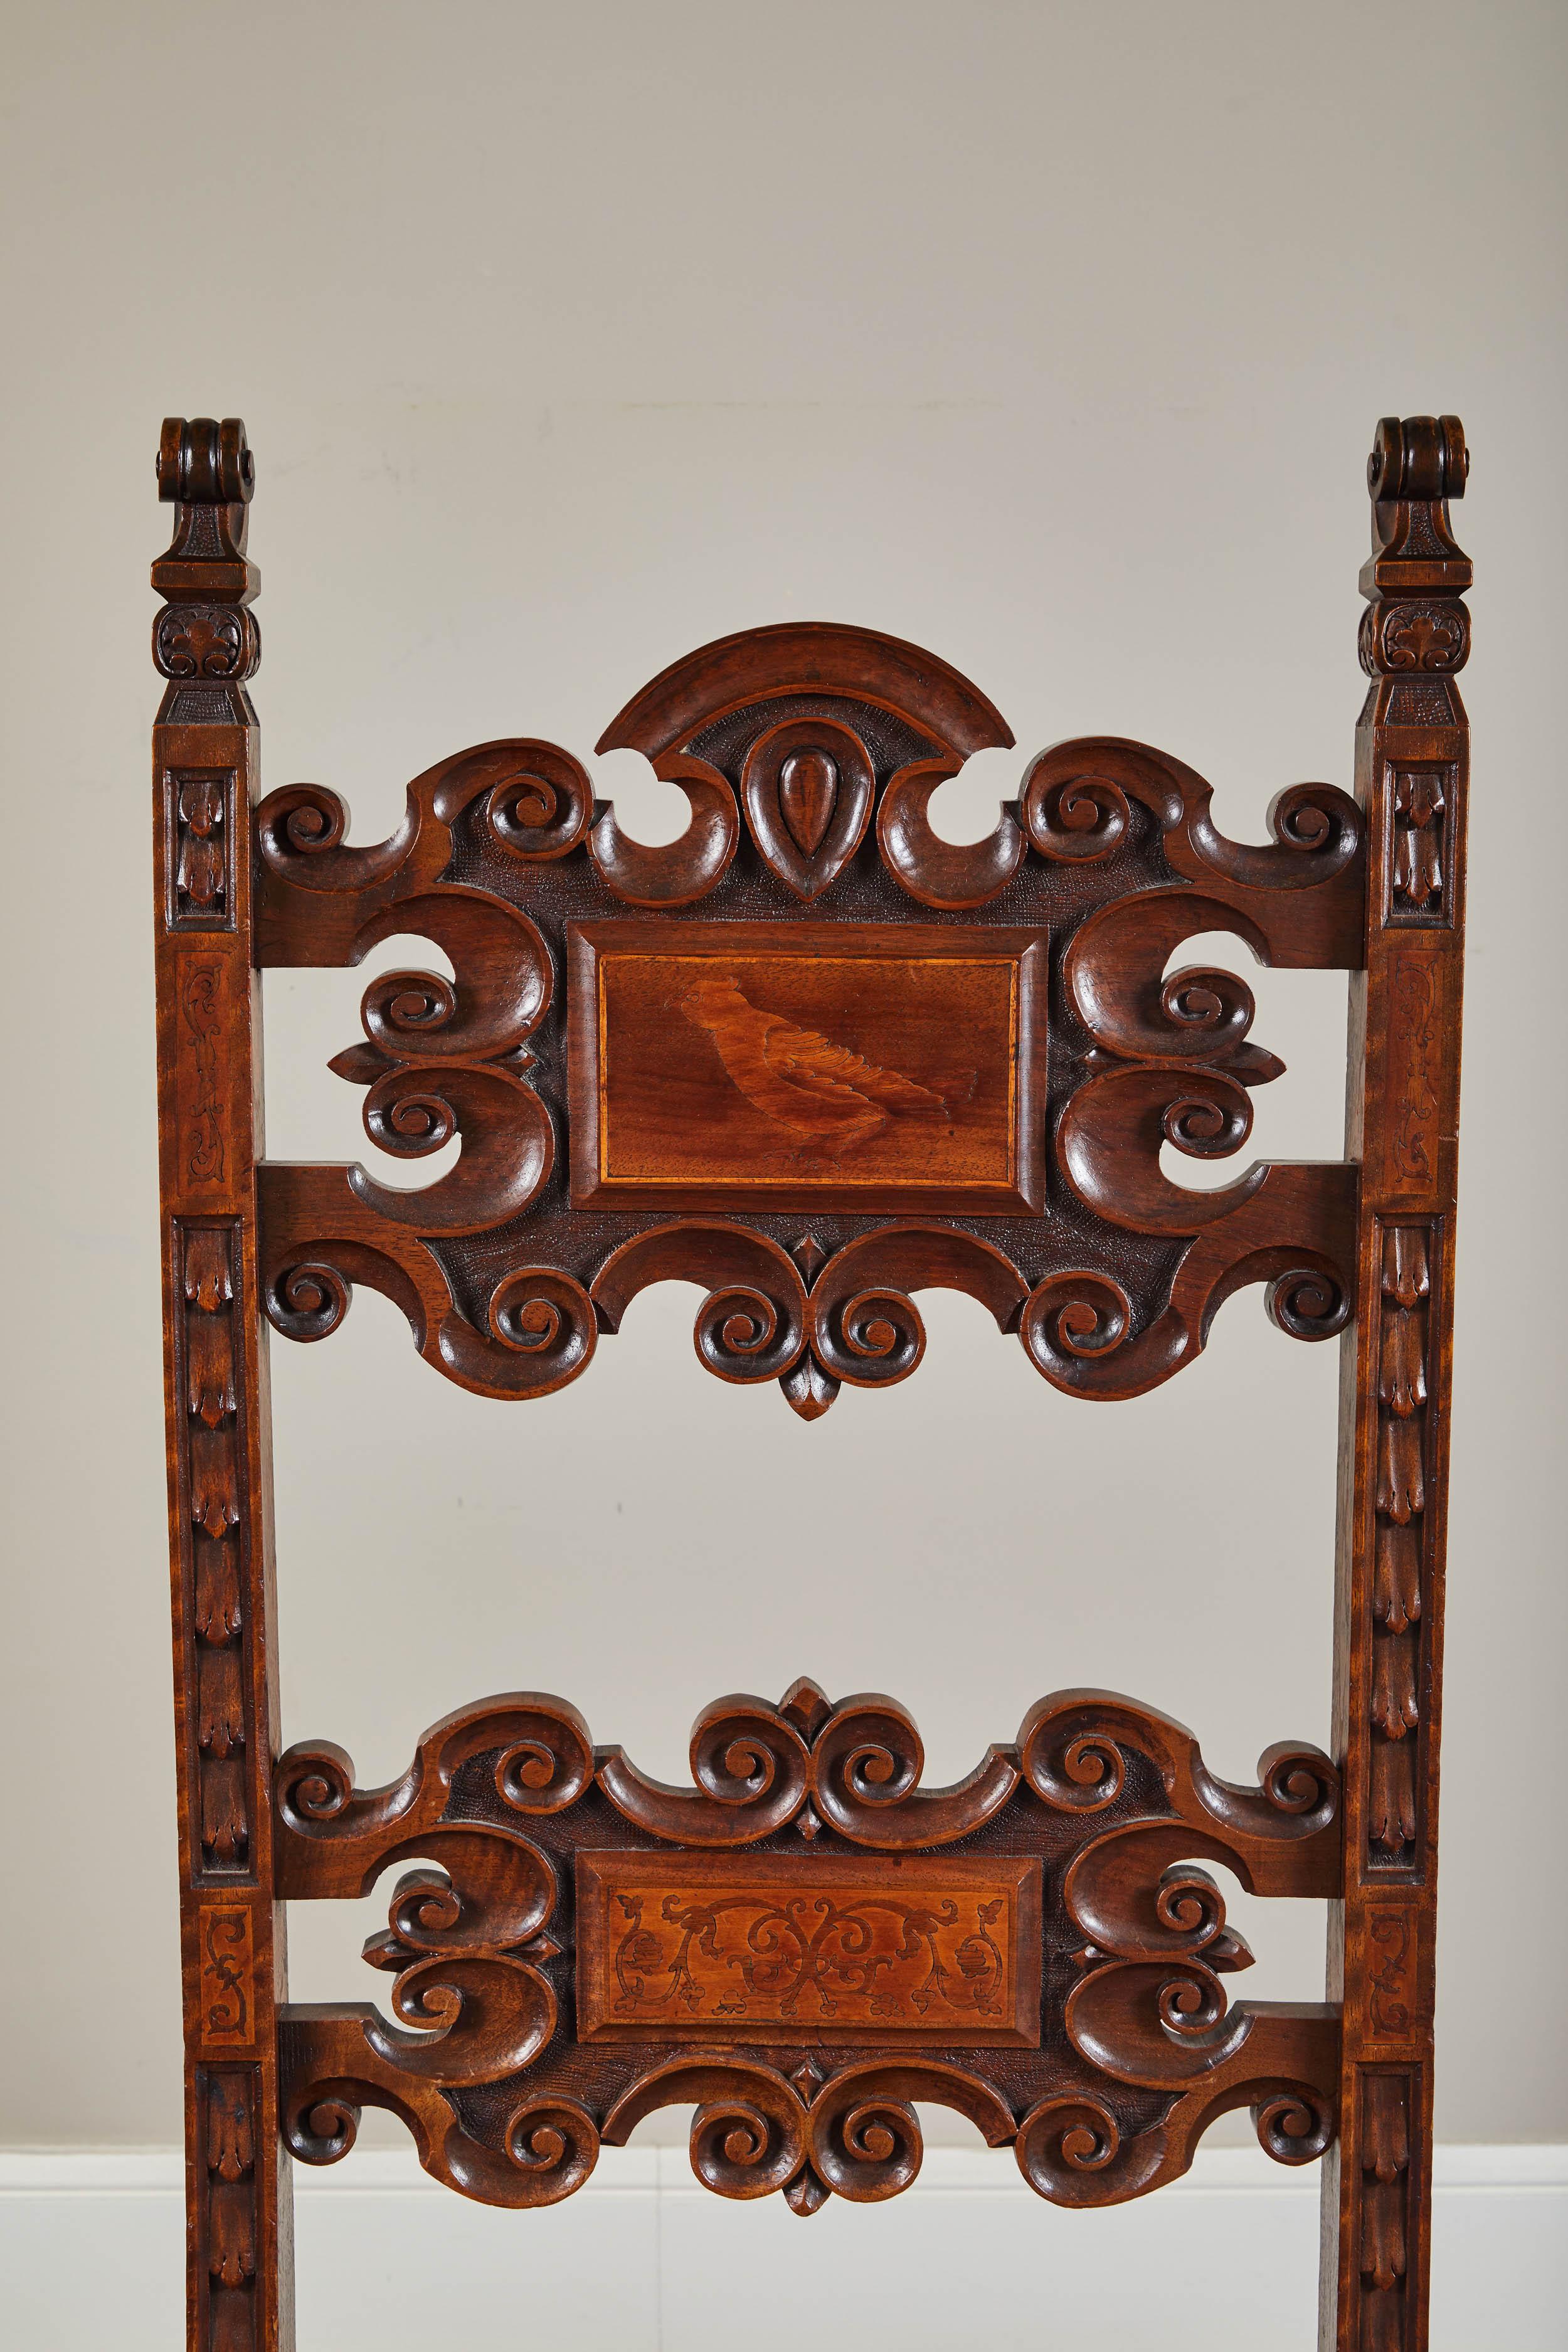 This is a set of four 19th century Spanish walnut renaissance Revival dining chairs. Recently reupholstered and refinished. Handsomely carved overall with fluid lines and graceful proportions. The carved open work back rests with two front panels.